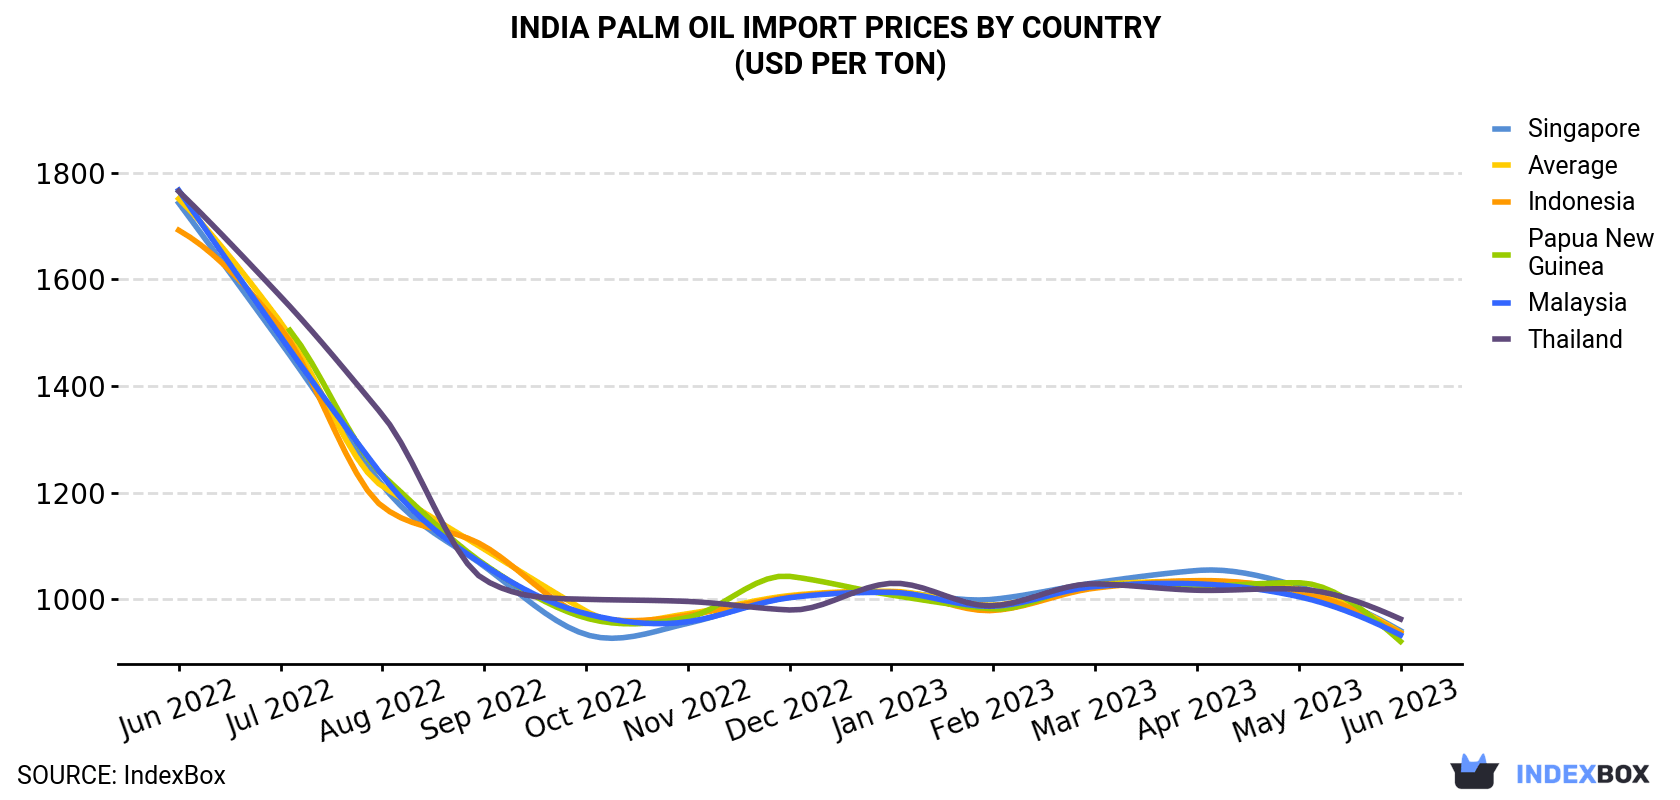 India Palm Oil Import Prices By Country (USD Per Ton)